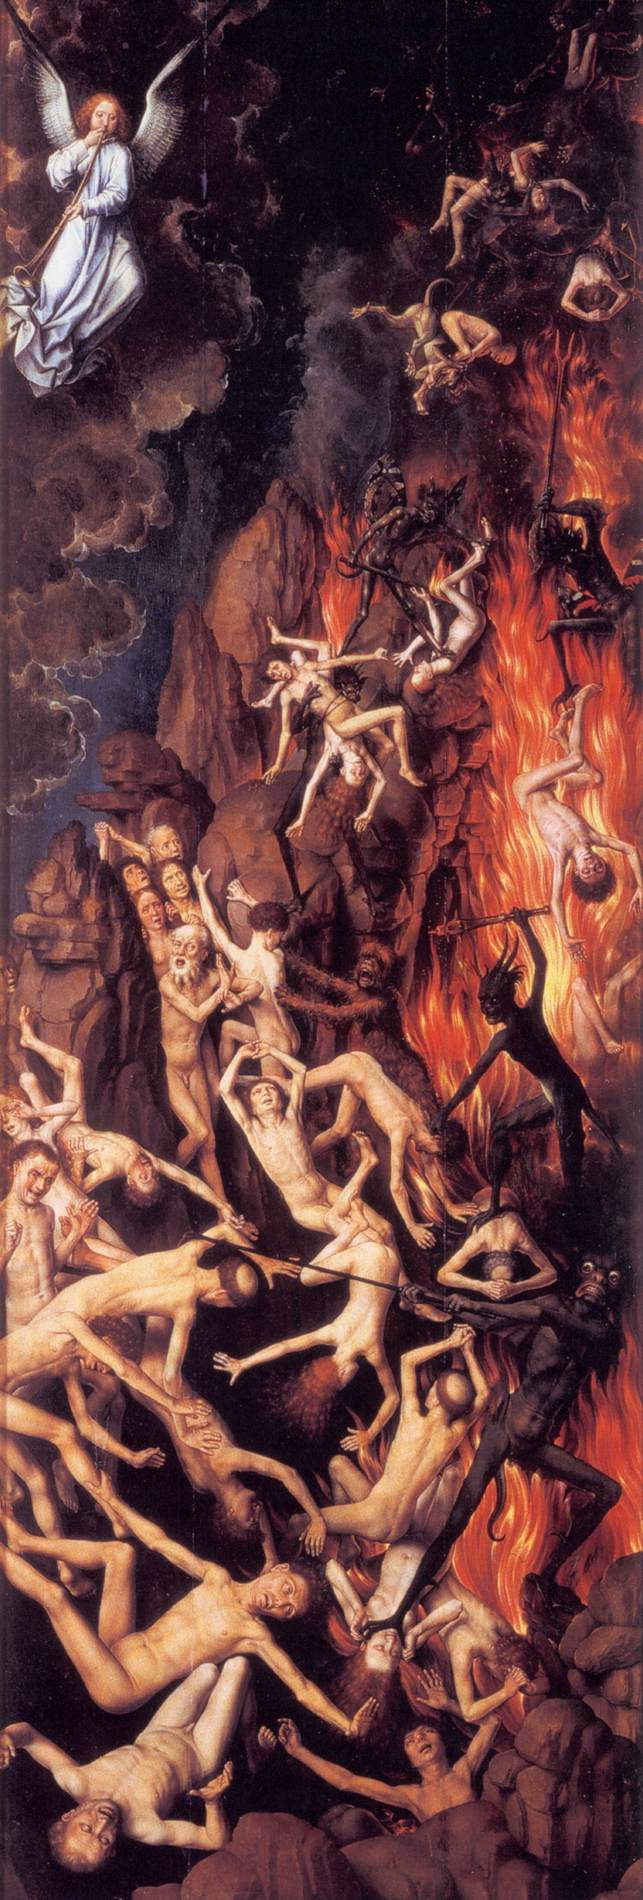 Hans Memling. Judgment. Triptych. Right wing: the overthrow of the sinners in hell